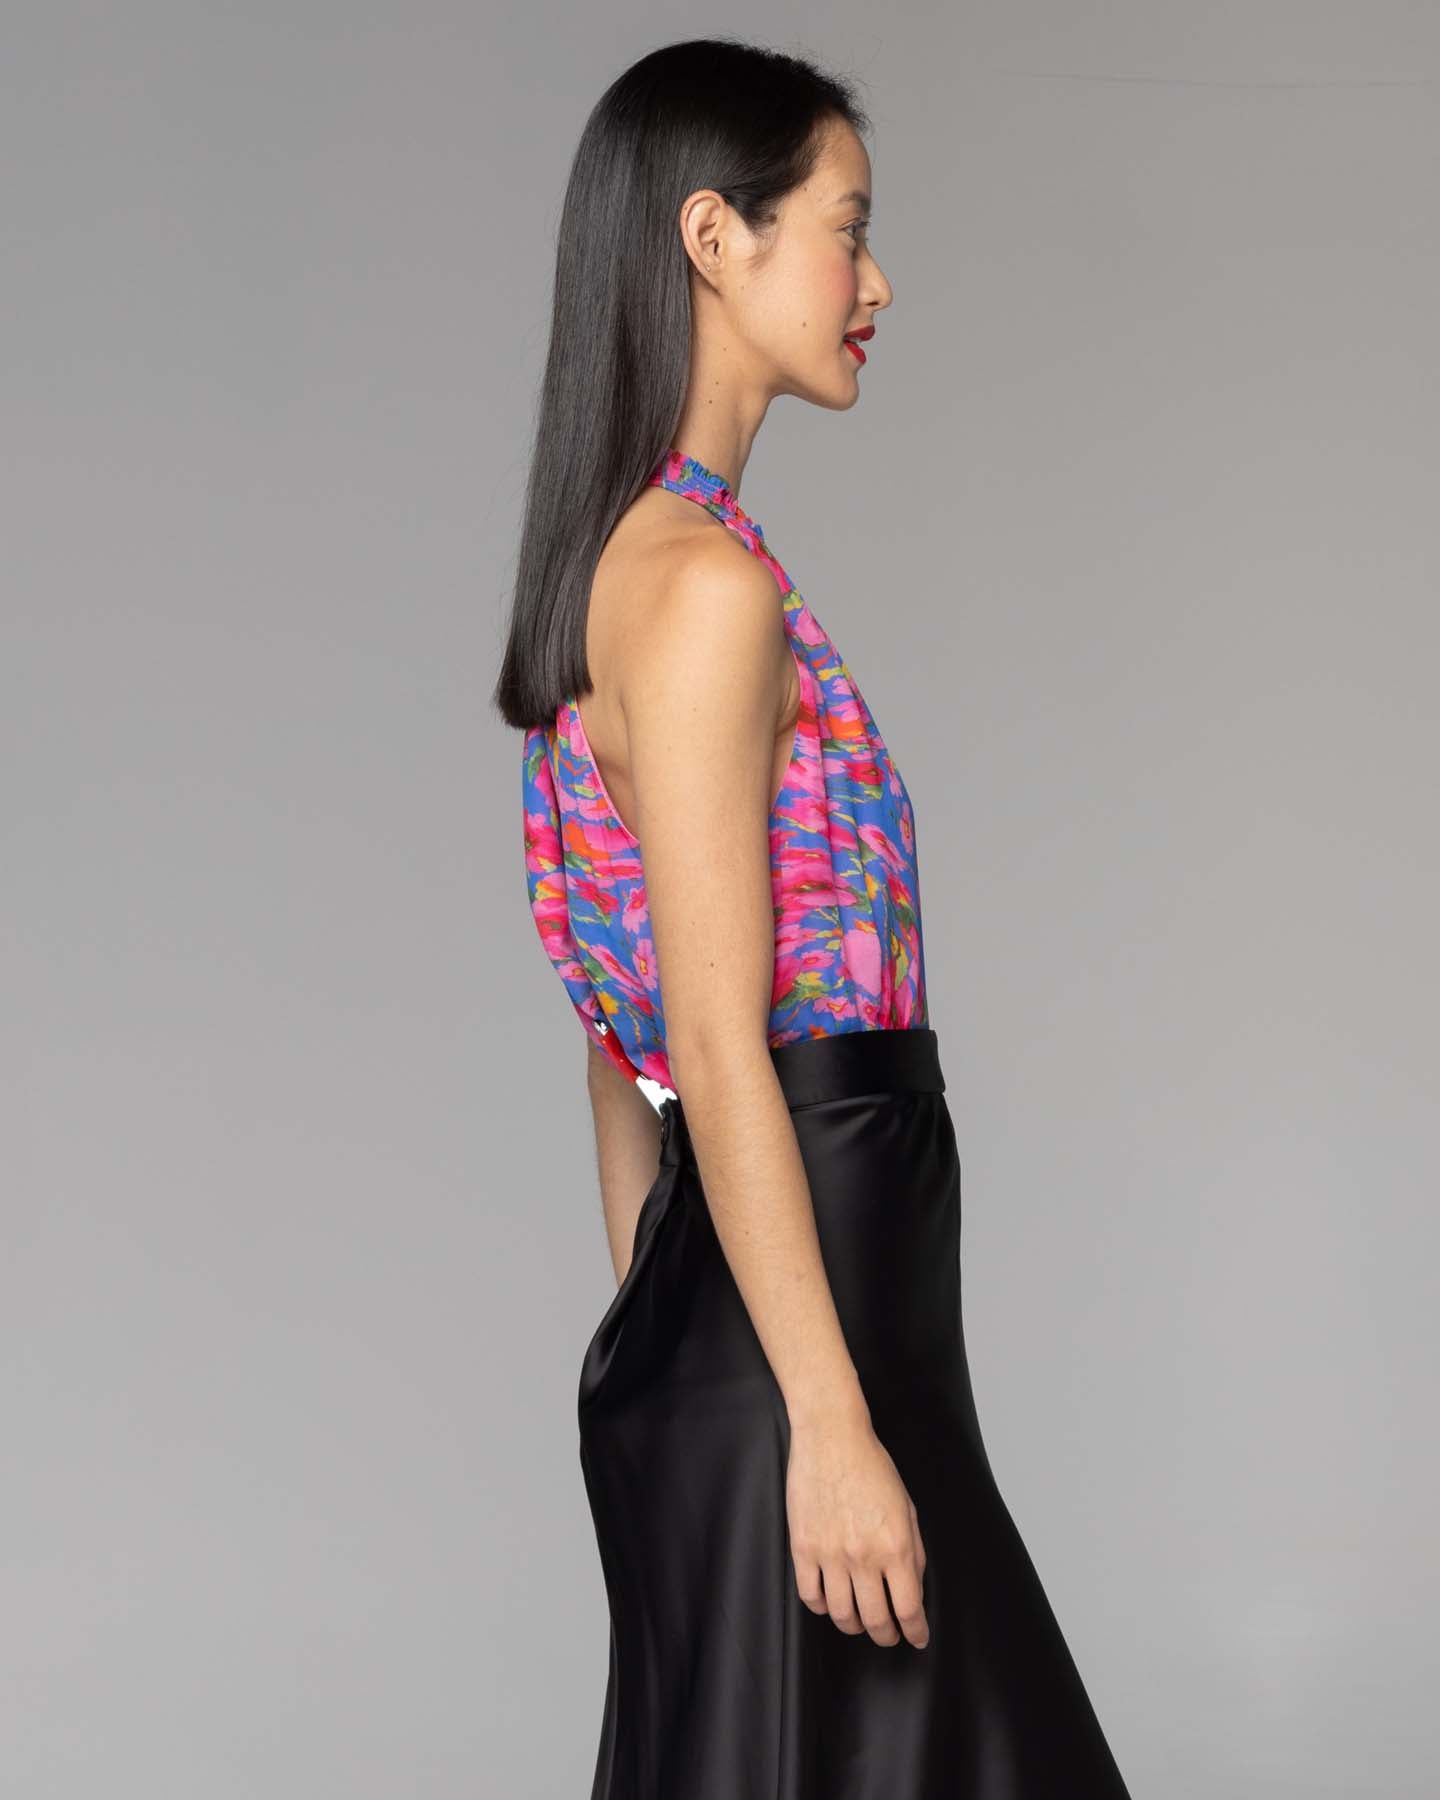 Fate+Becker Take Me Out High Neck Top - Warp Floral